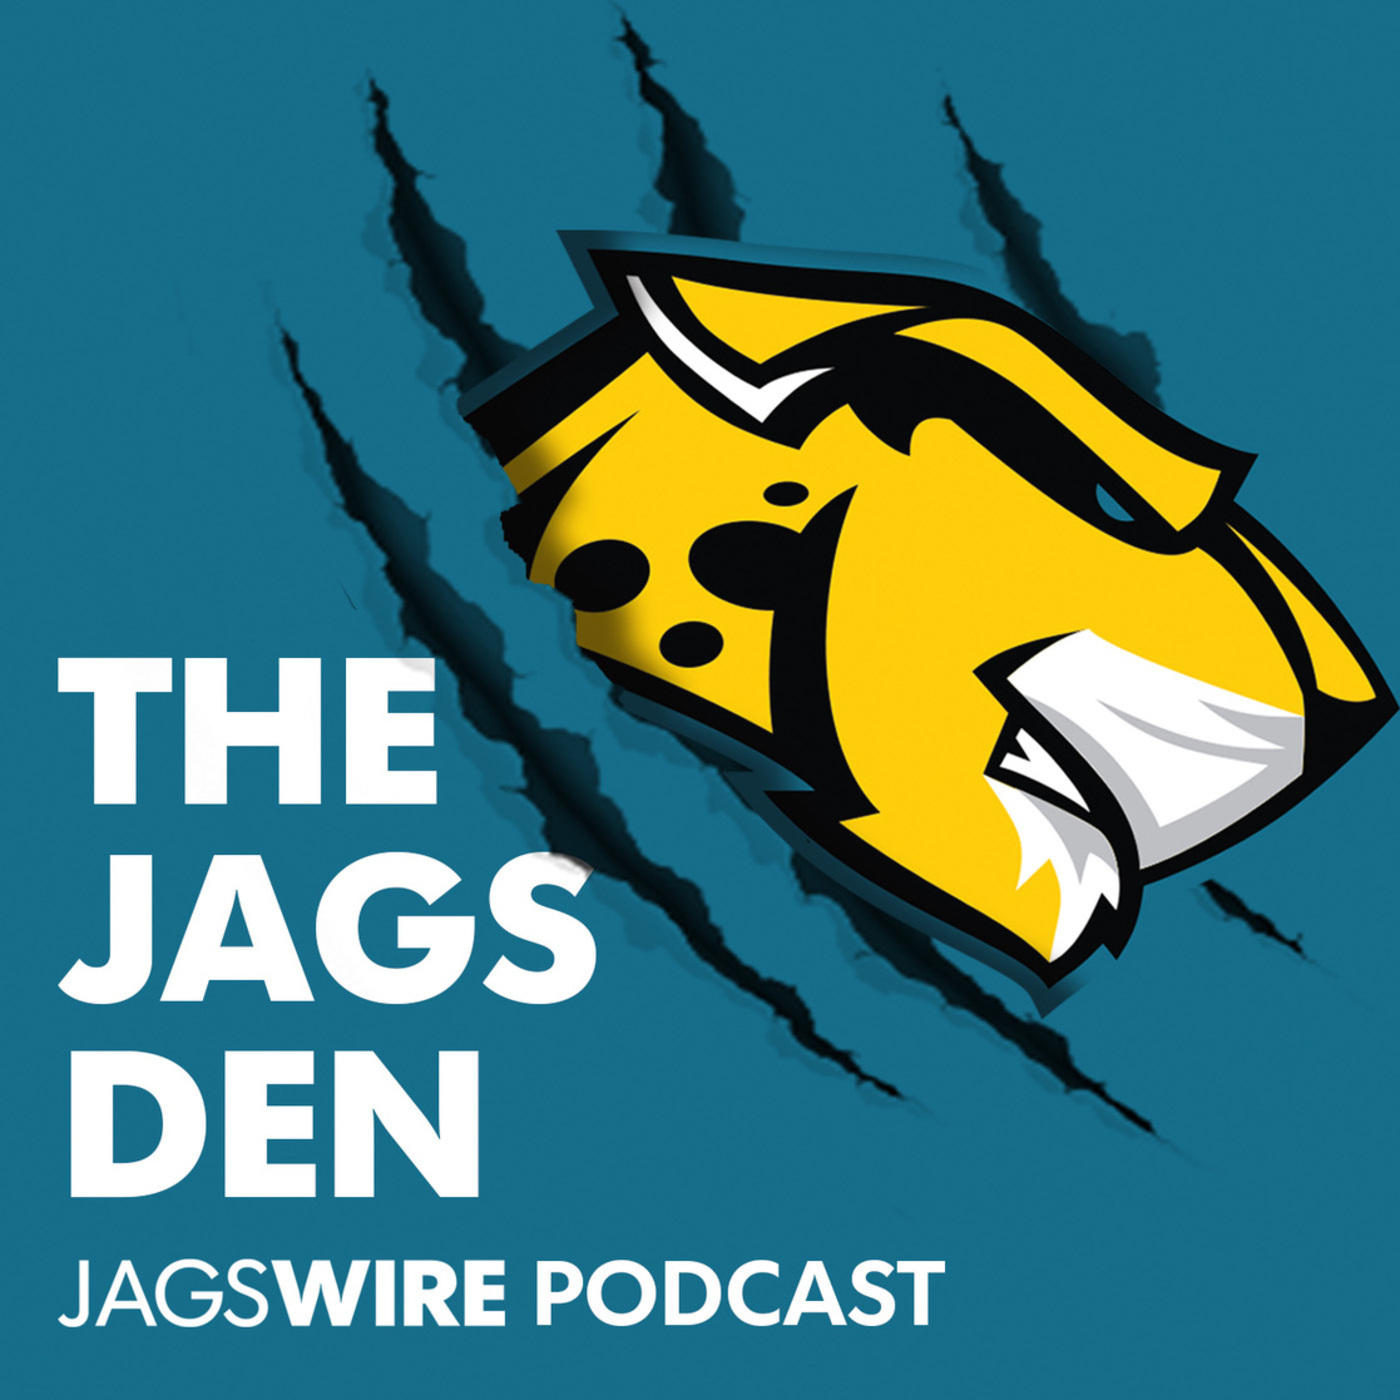 Jags Den Podcast Ep. 21: Marqise Lee falling behind? Discussions on Corey Grant, BB5 and ASJ standing out and Dez coming to the Jags